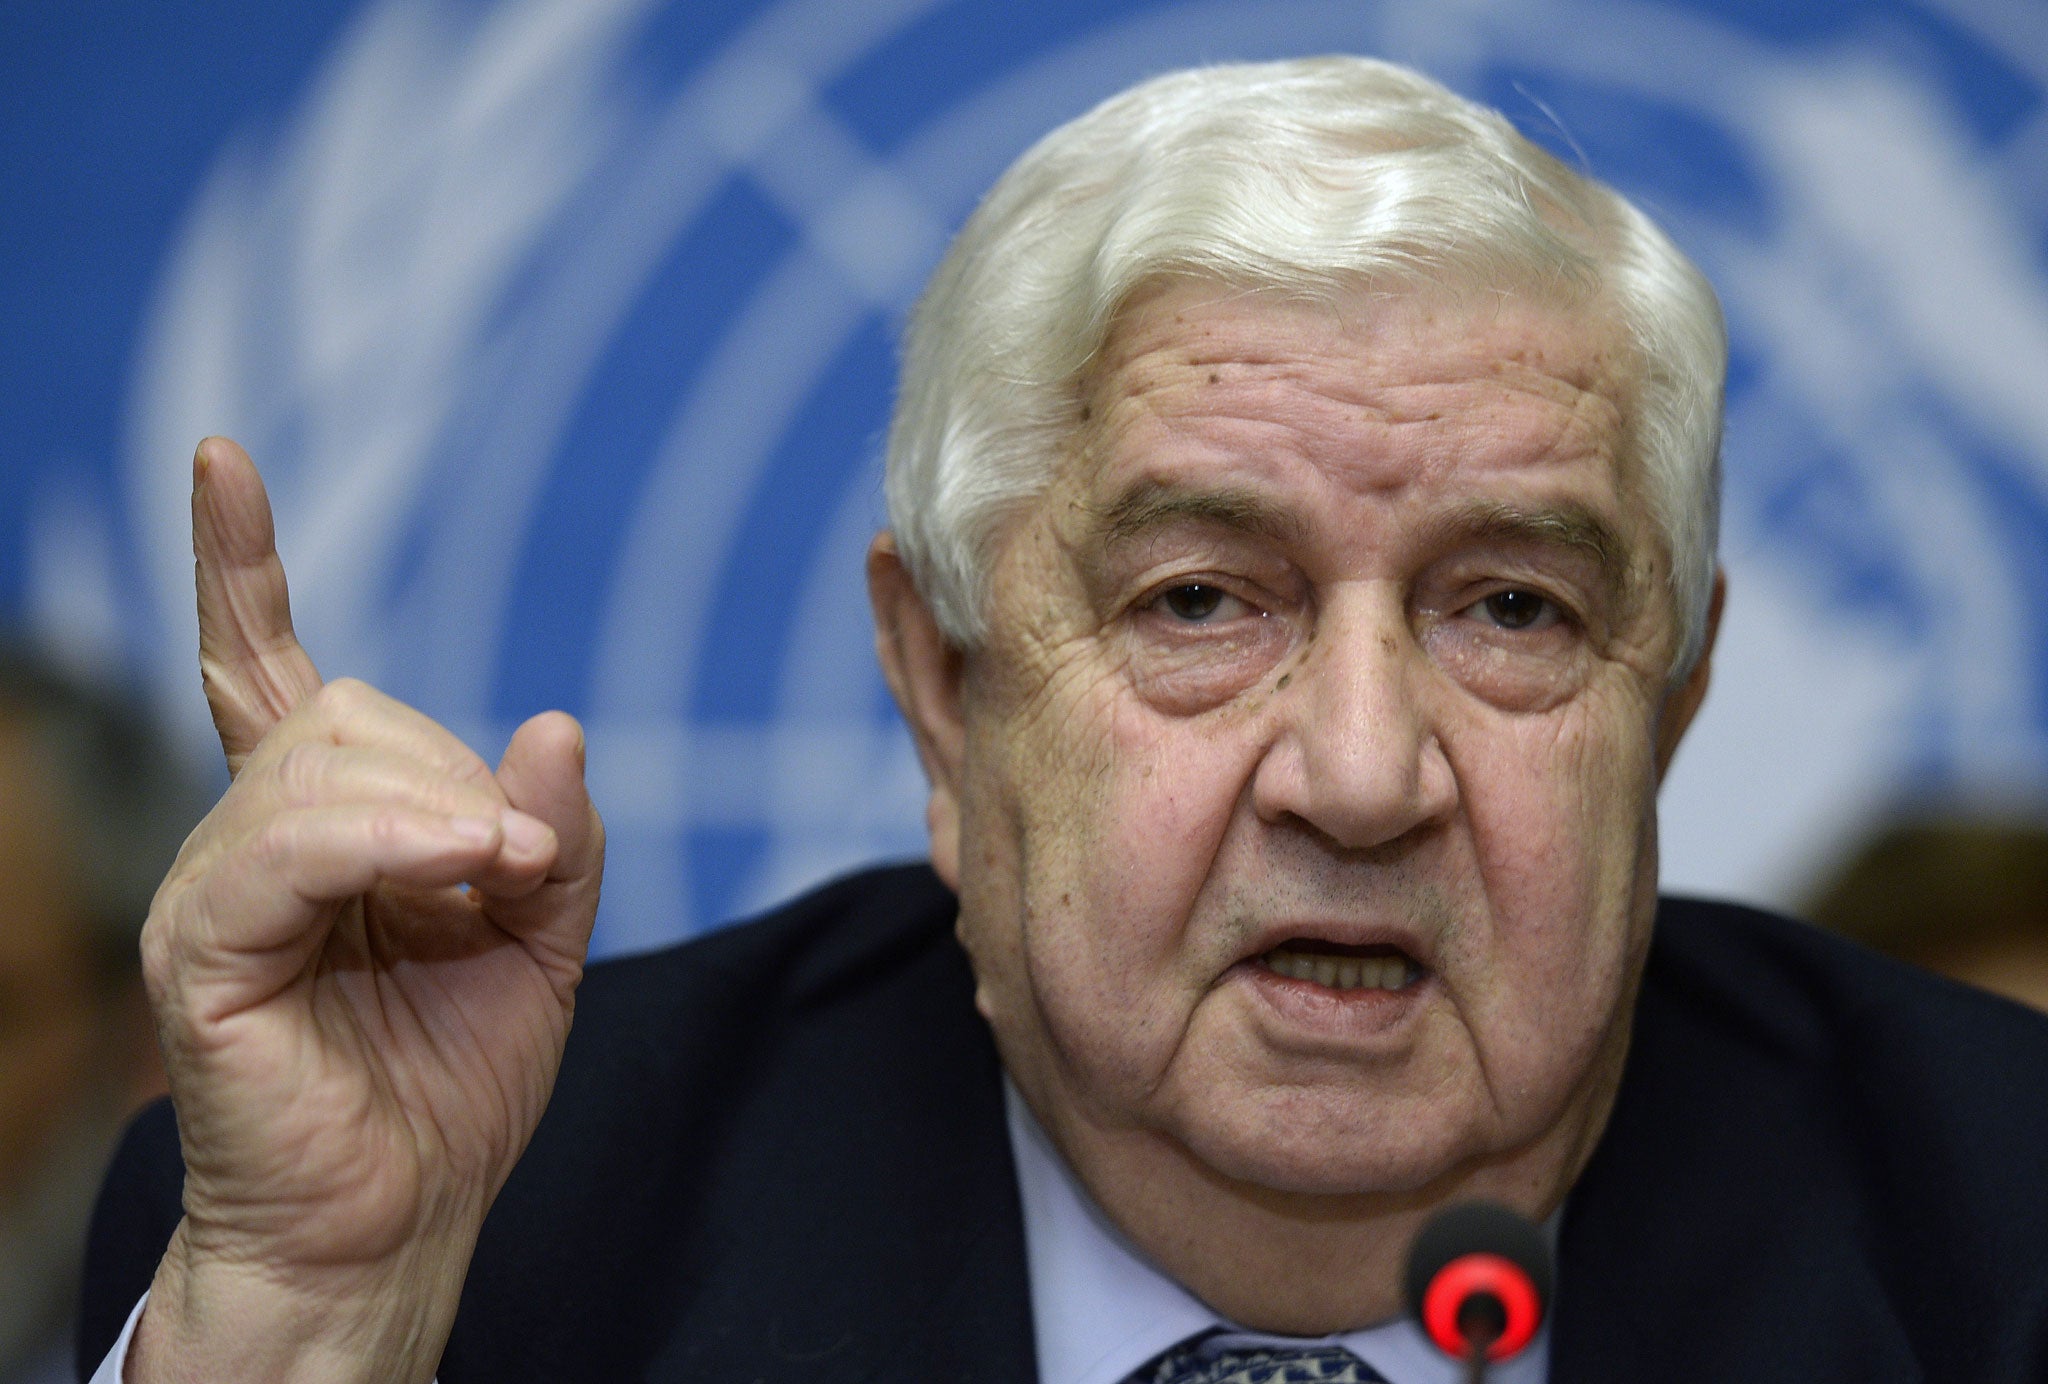 Syria's Foreign Minister and head of the Syrian government delegation Walid Muallem speaks during a press briefing on peace talks at the United Nations headquarters on January 31, 2014 in Geneva